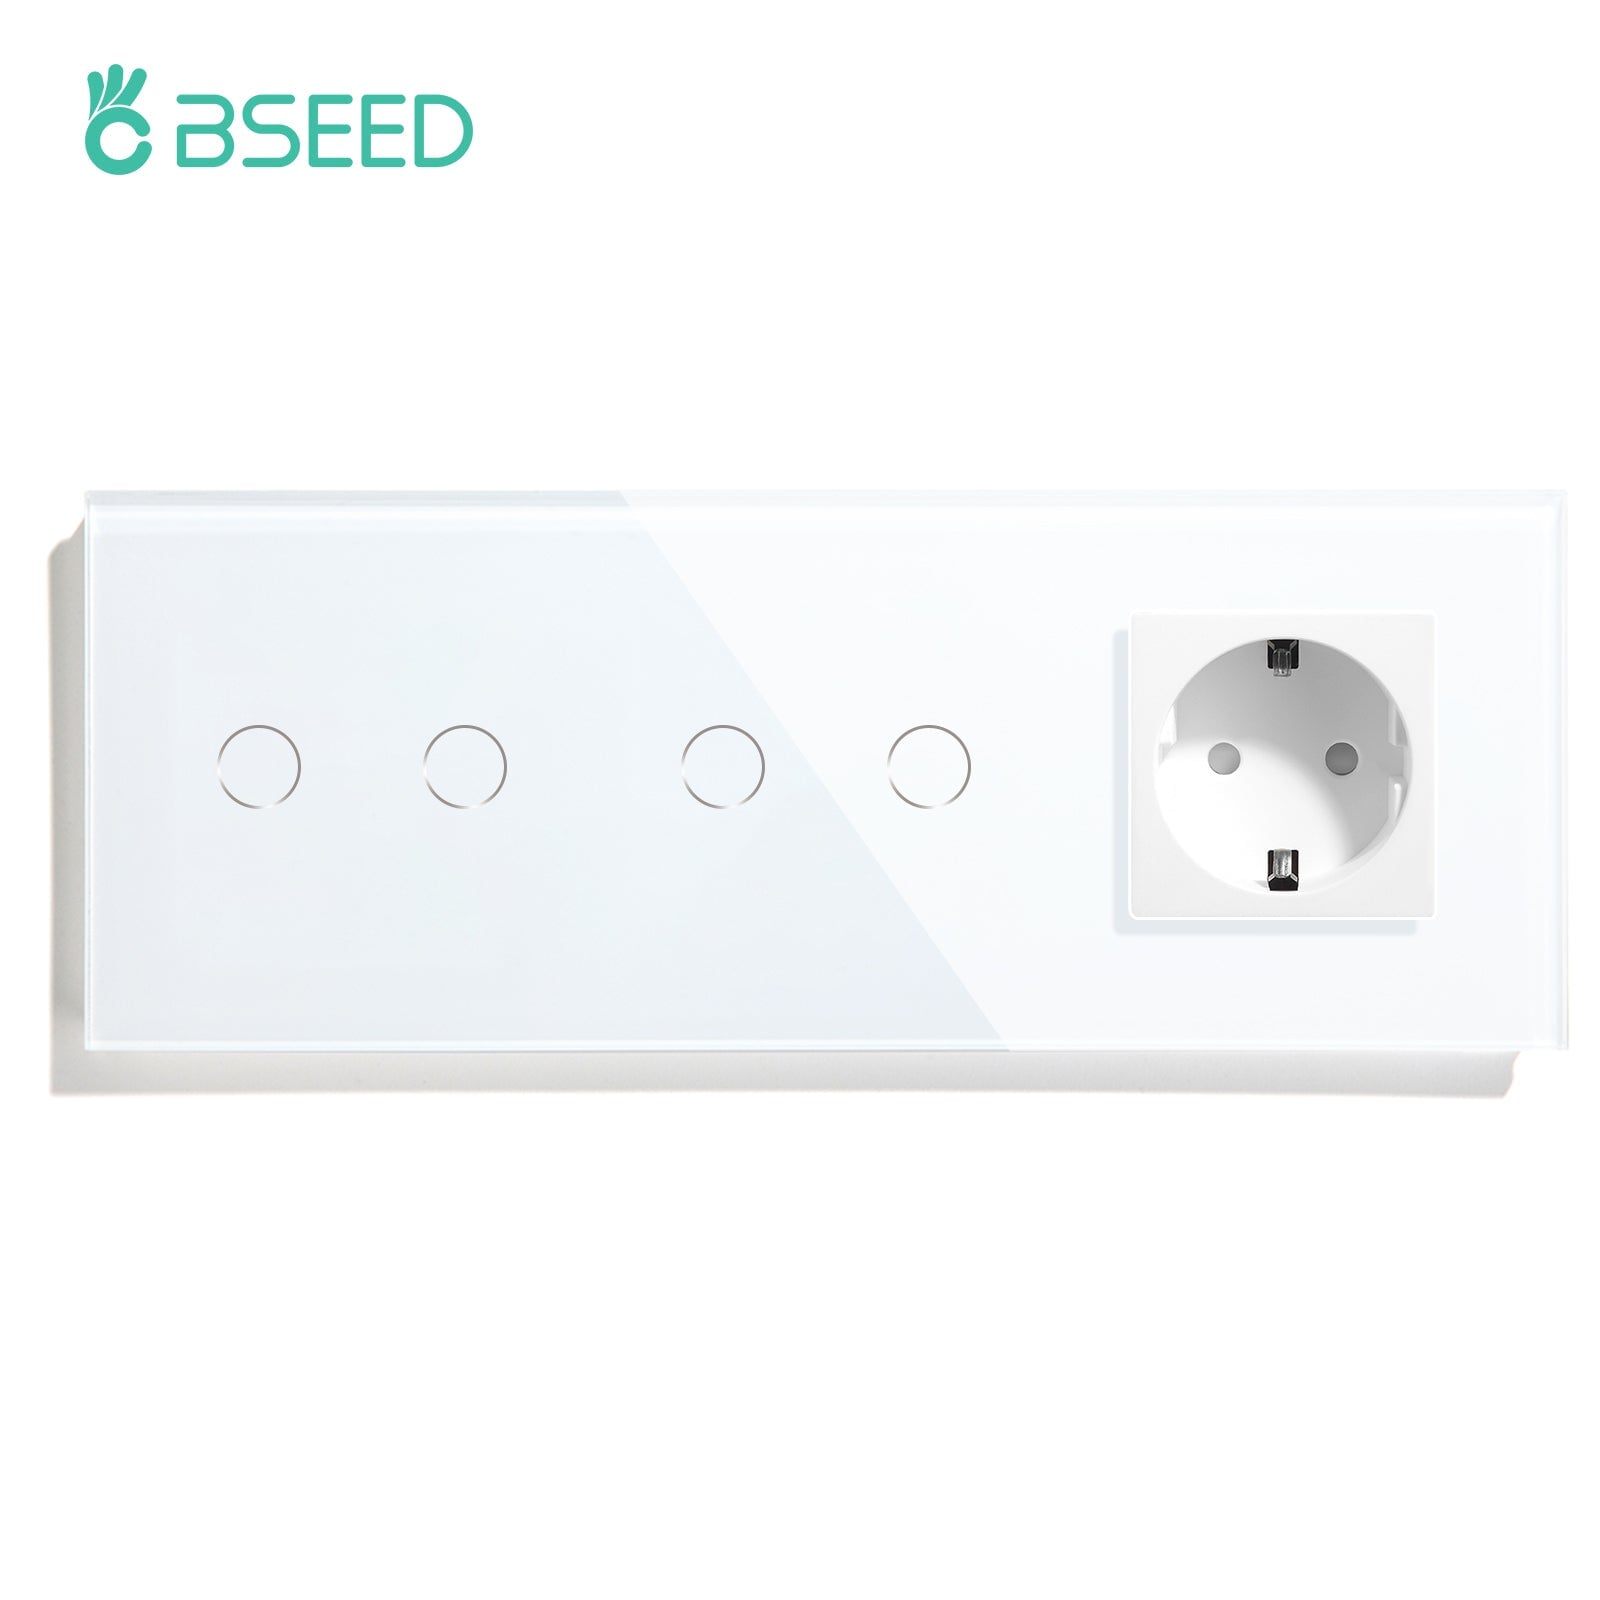 BSEED Double Touch 1/2/3 Gnag 1/2/3 Way Light Switch With EU Socket Power Outlets & Sockets Bseedswitch White 2gang+2gang 1Way